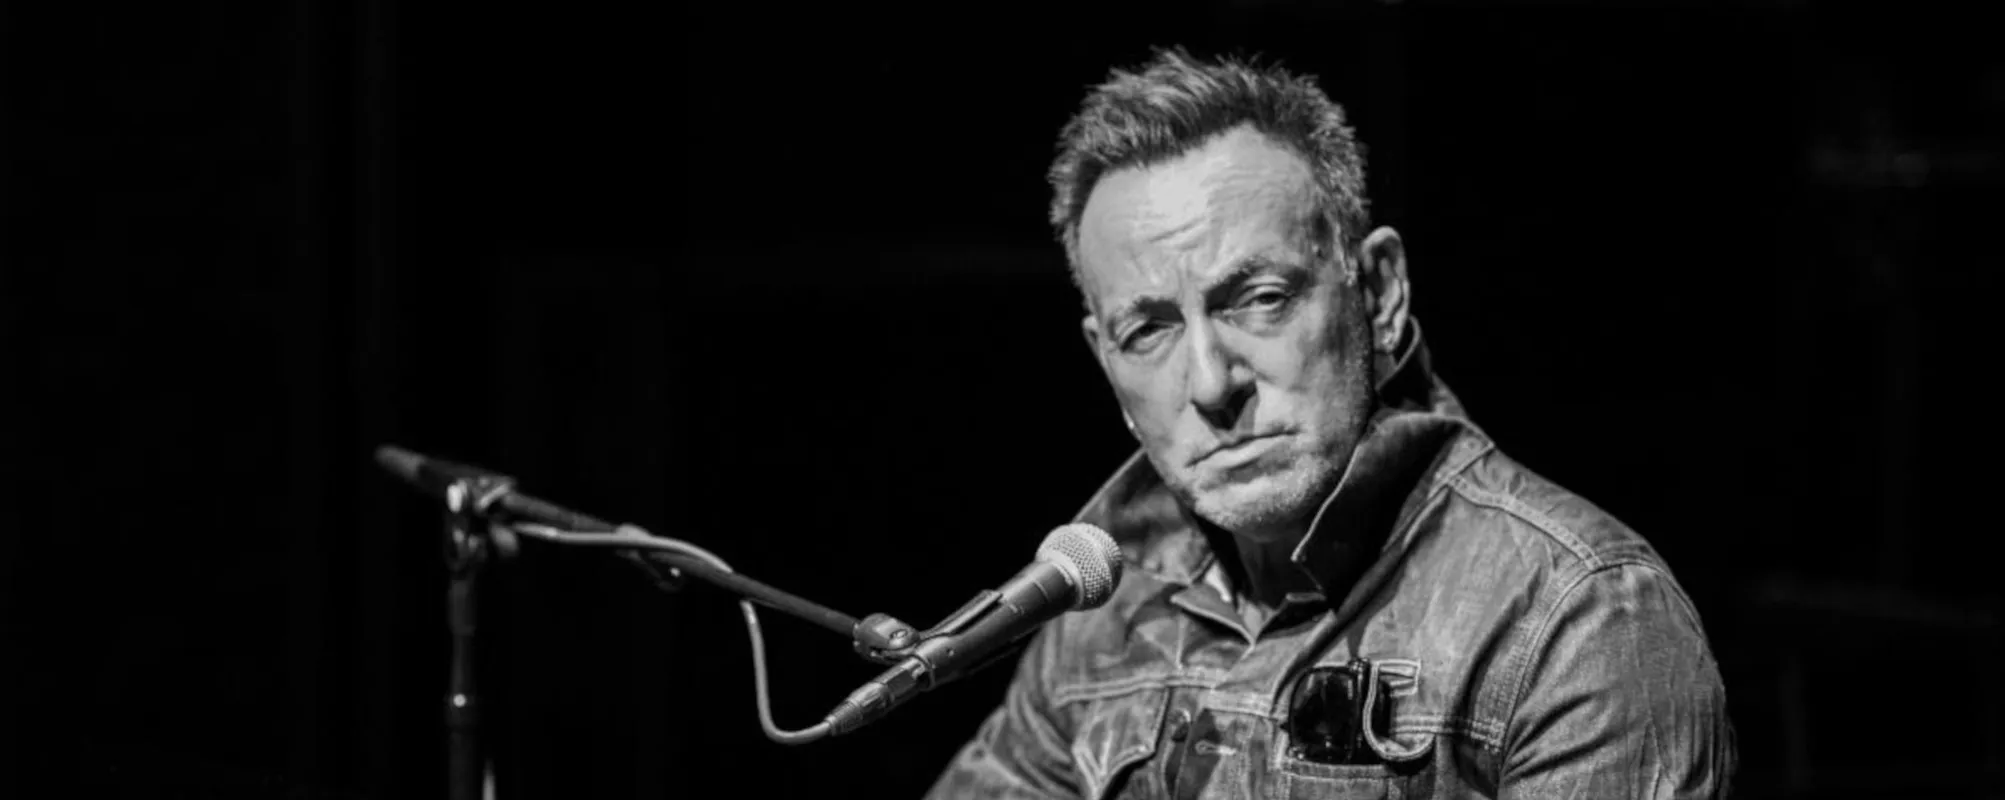 The Top 10 Bruce Springsteen Songs